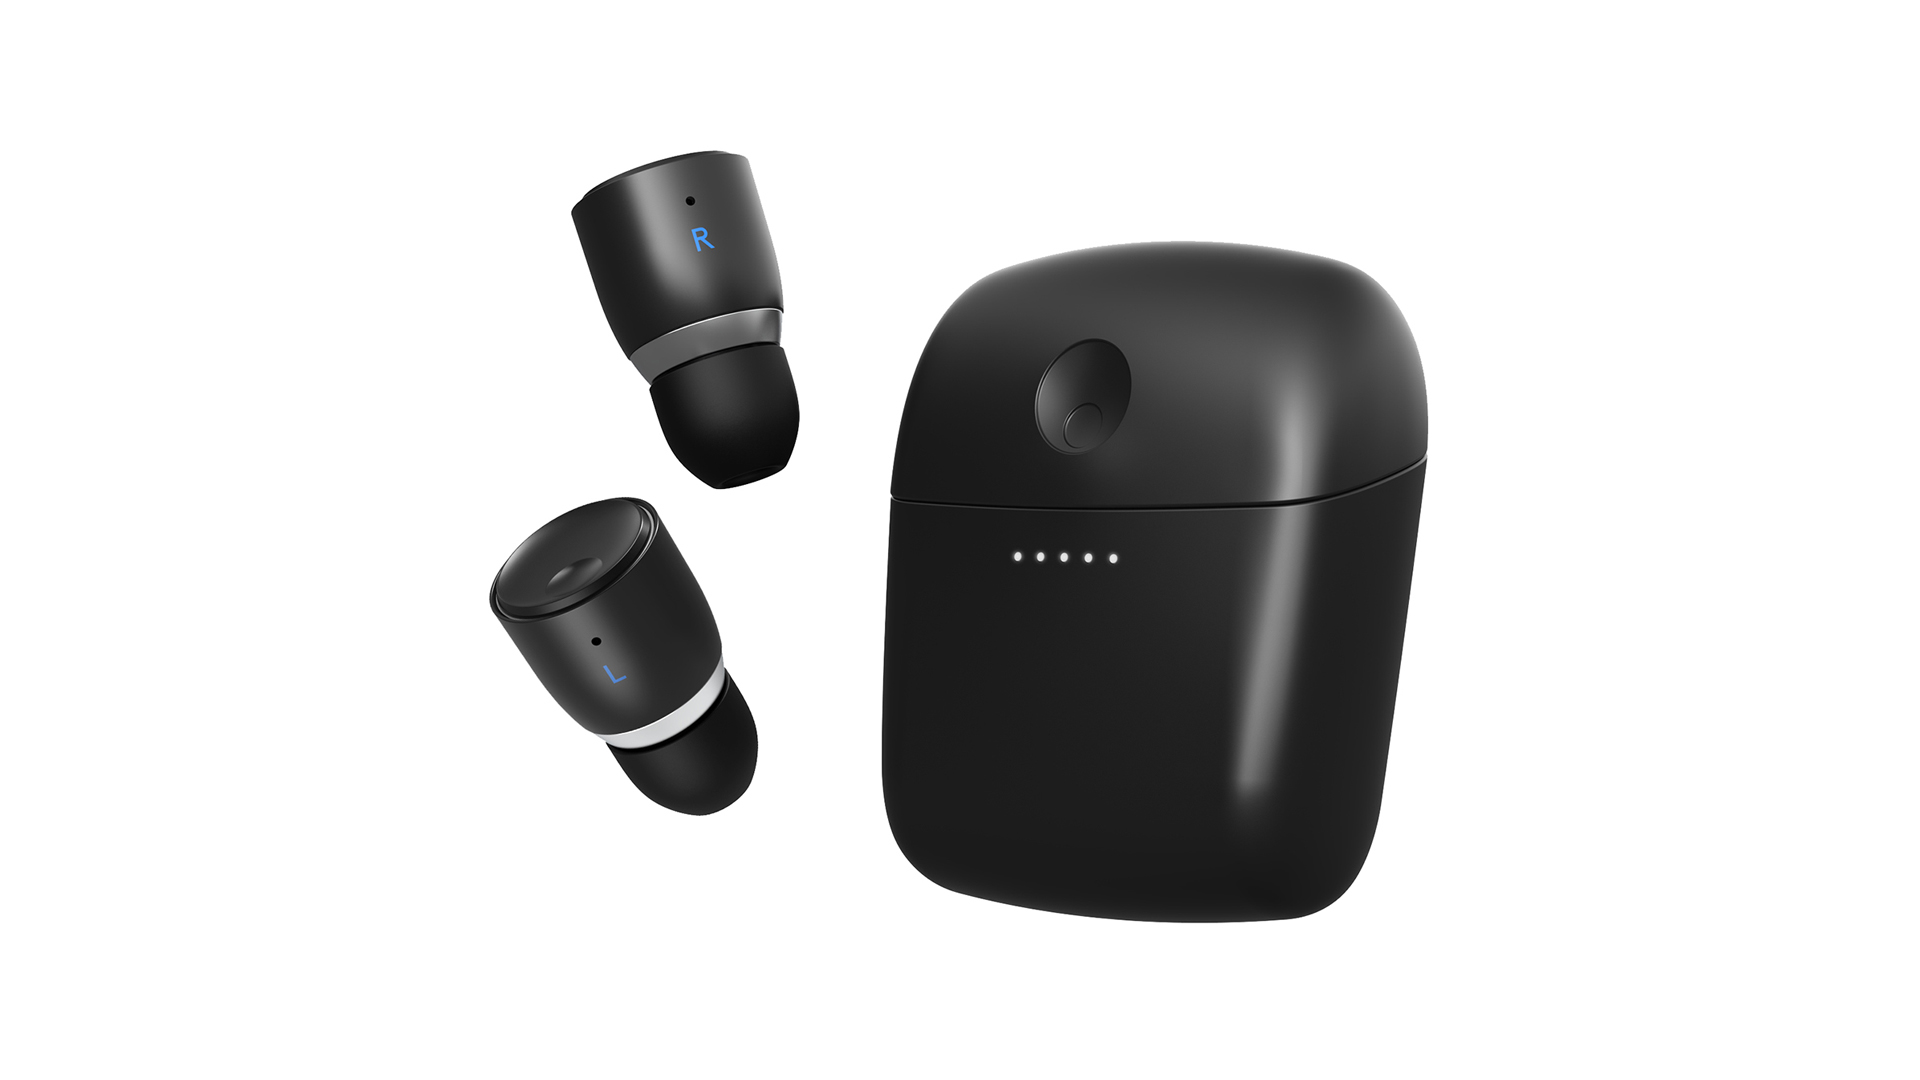 Cambridge Audio Melomania 1 Plus true wireless earbuds, left earbud and right side charging case